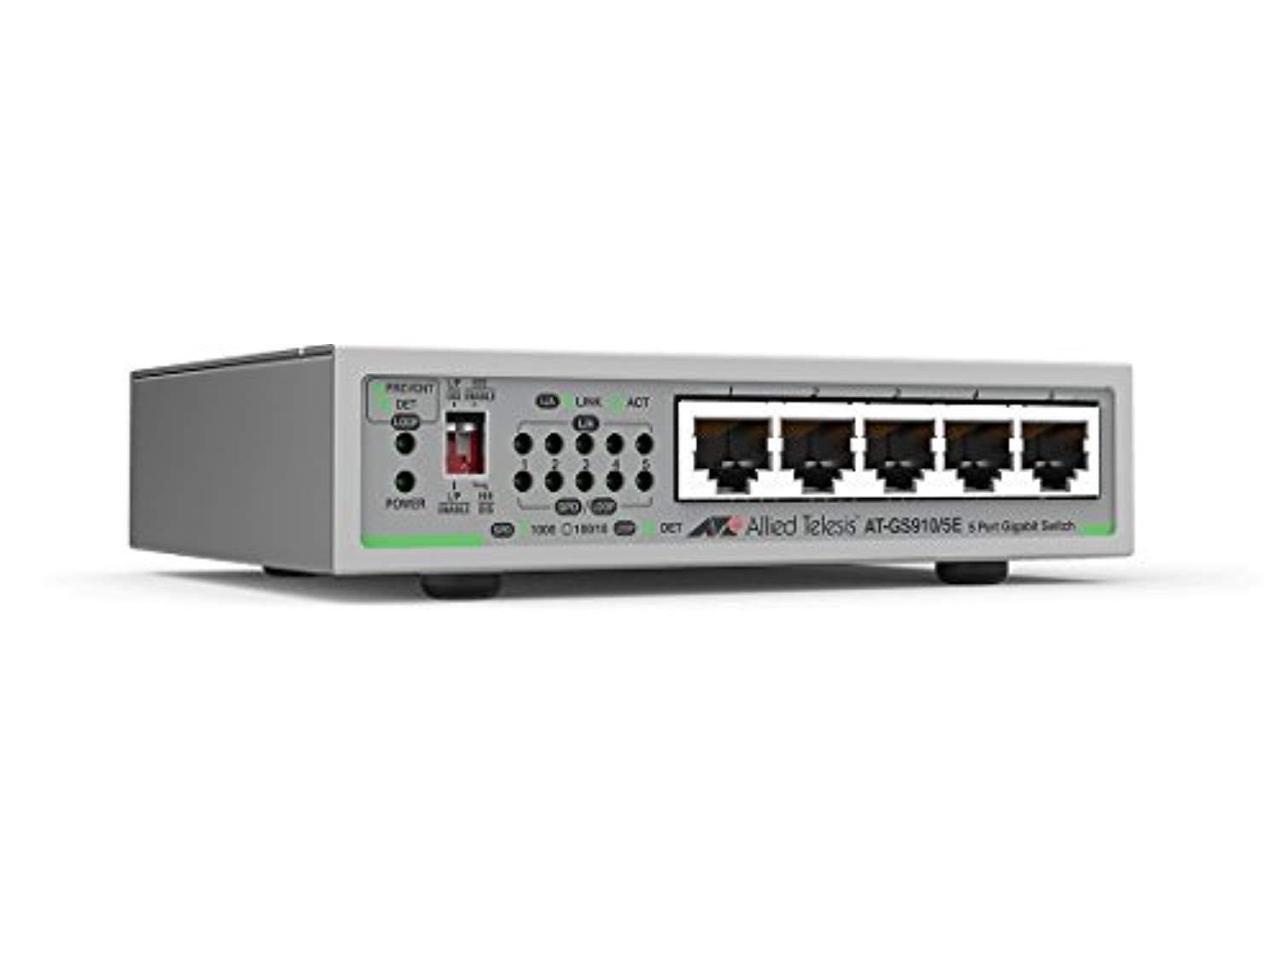 Allied Telesis GS910 AT-GS910/5E-10 Unmanaged Gigabit Ethernet Unmanaged Switch